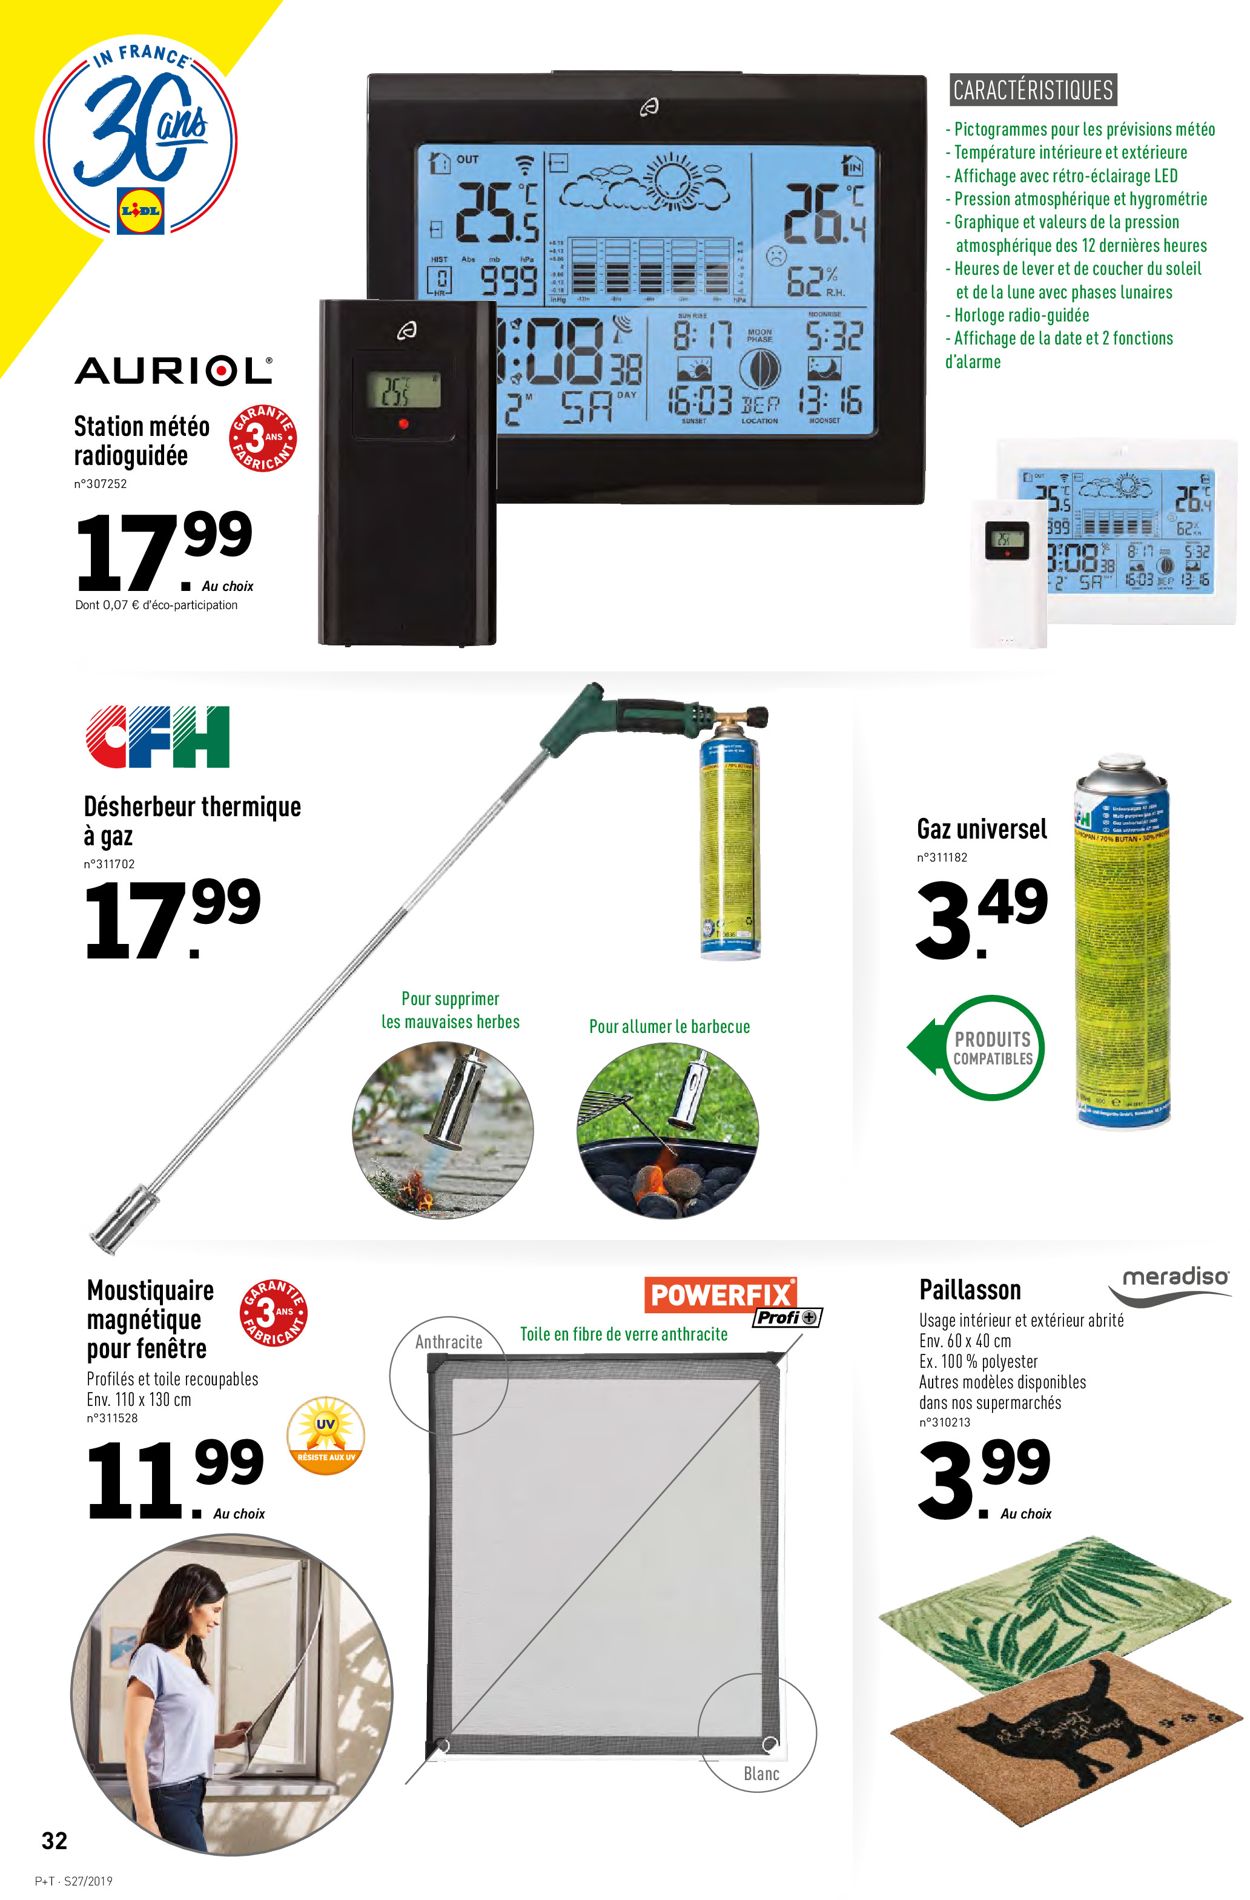 Lidl Catalogue - 03.07-09.07.2019 (Page 32)